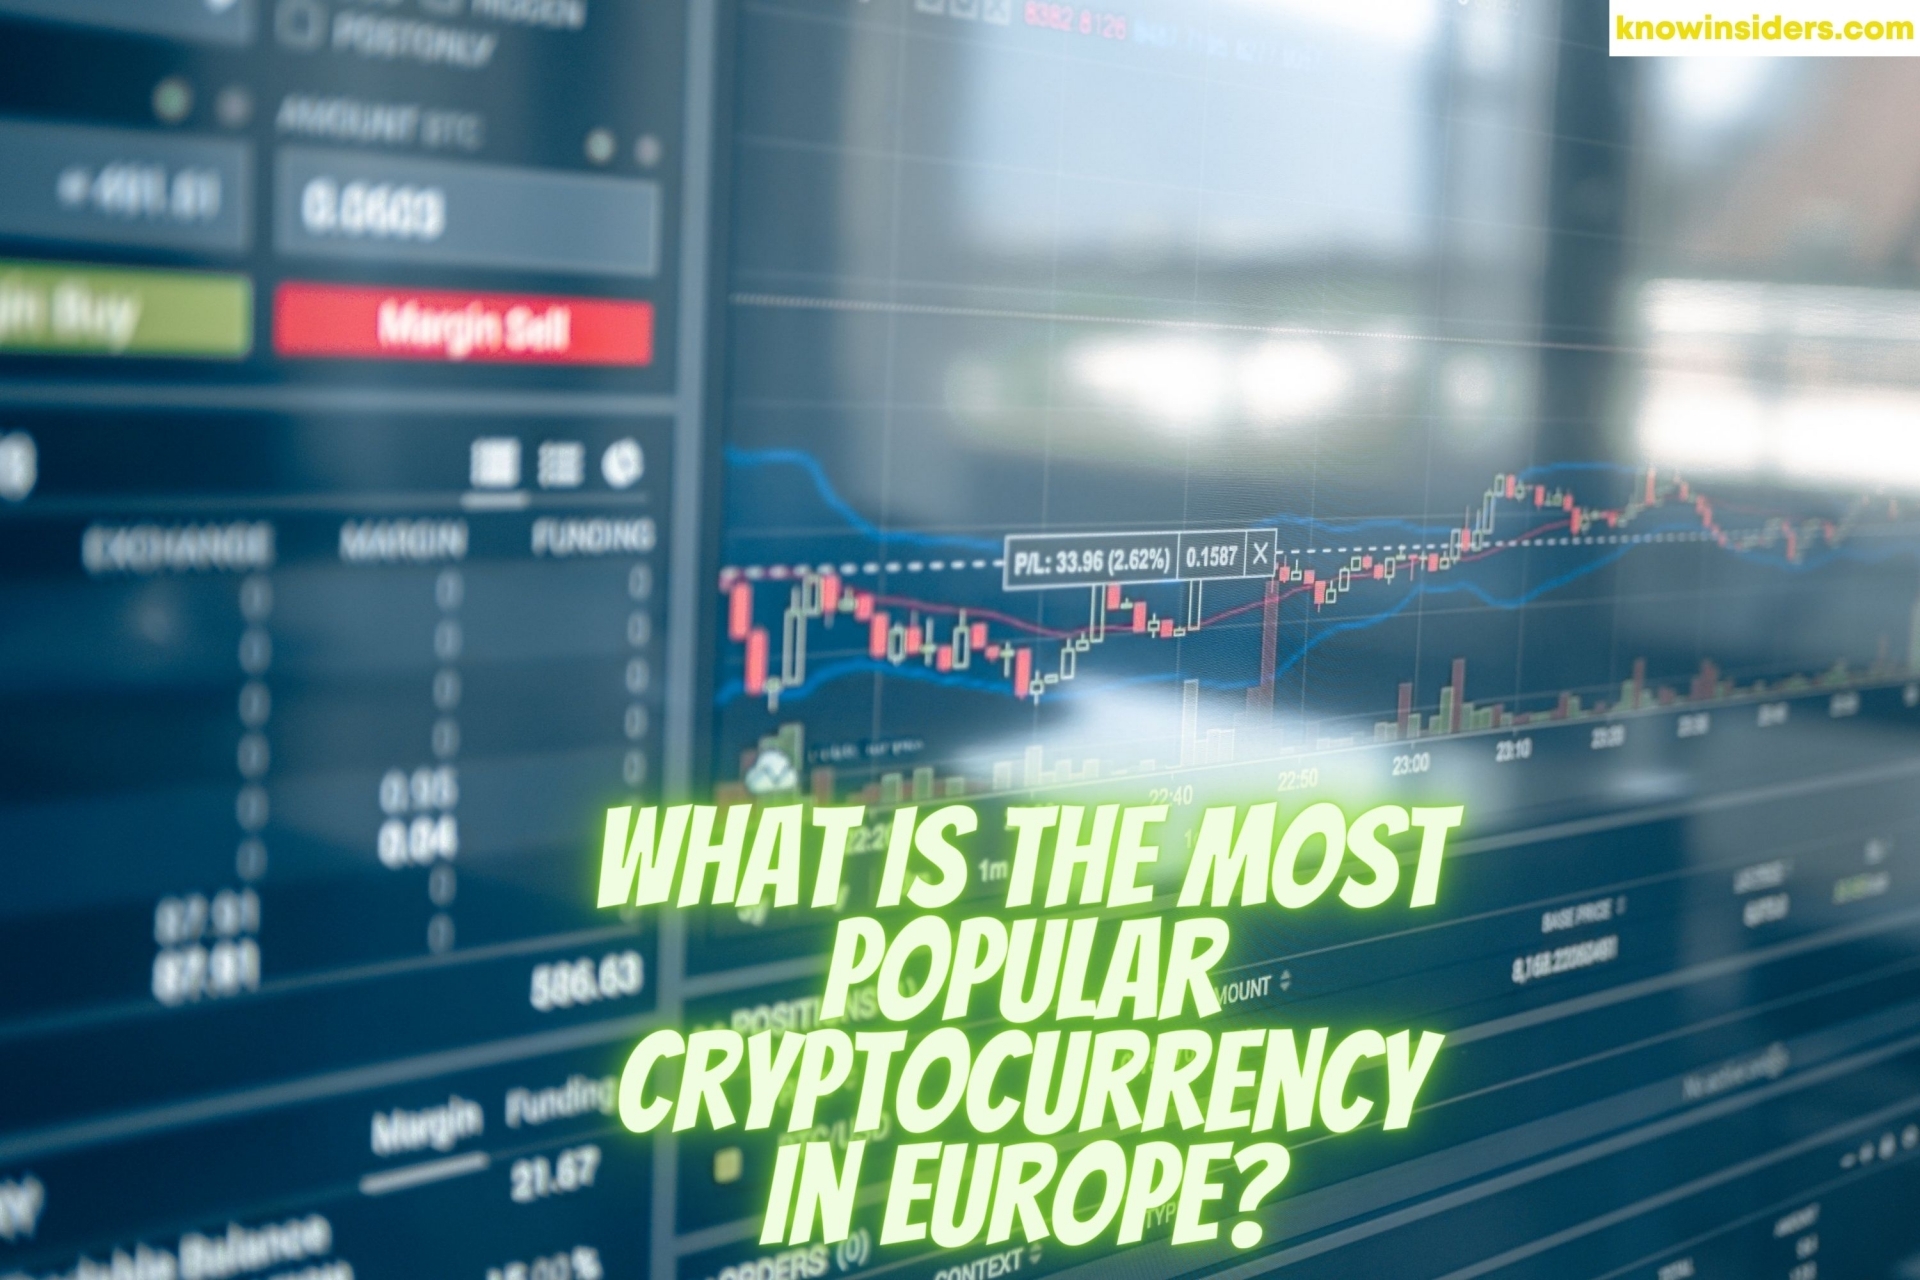 What Are The Most Popular Cryptocurrencies In Europe